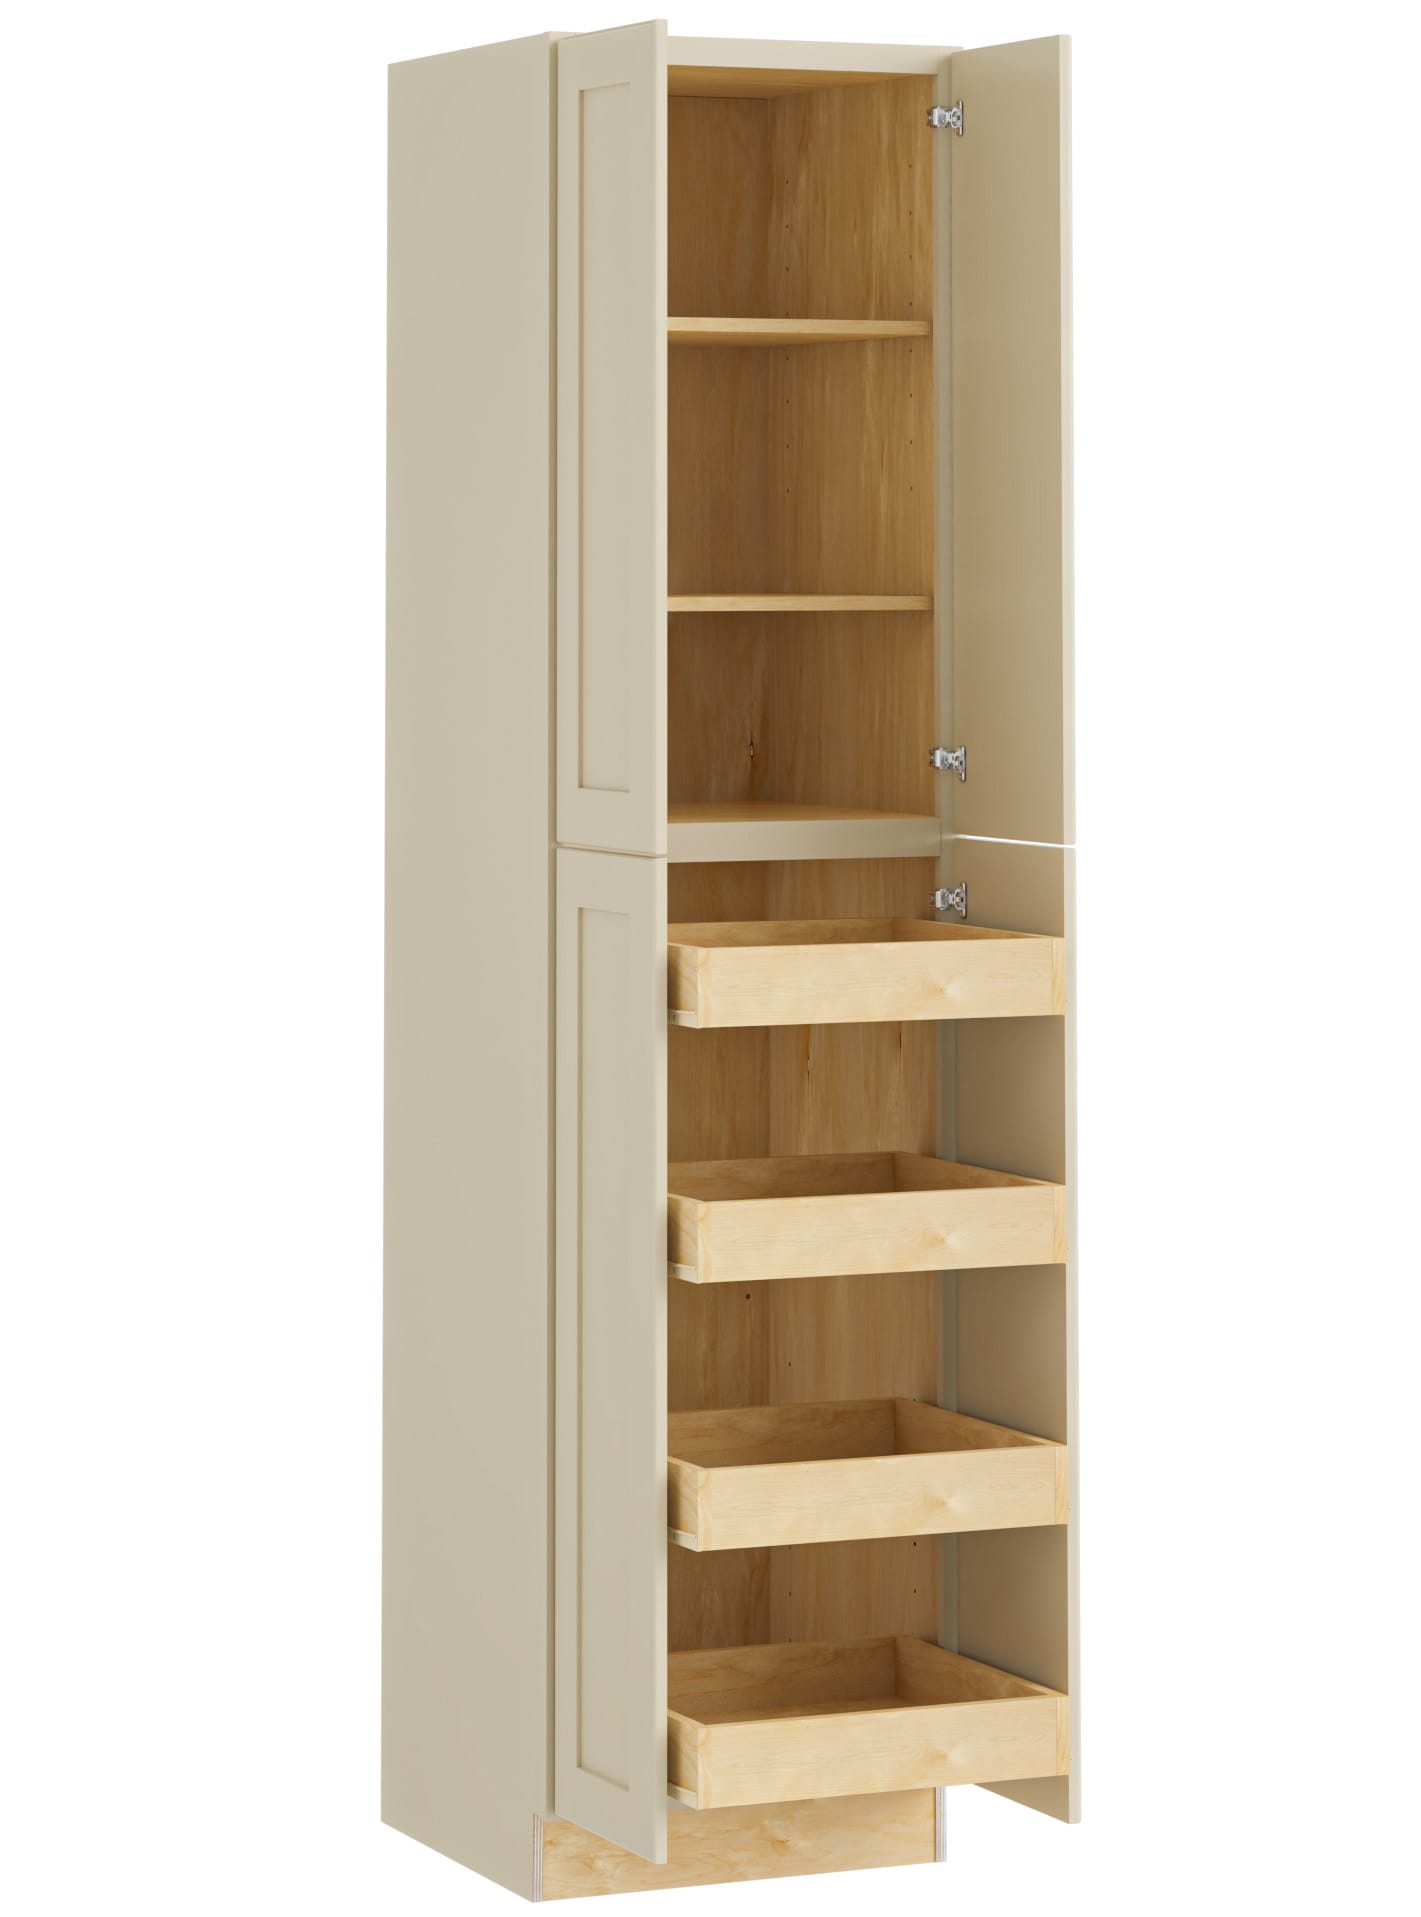 Luxxe Cabinetry 24-in W x 90-in H x 24-in D Norfolk Blended Cream Painted Door Pantry Fully Assembled Semi-custom Cabinet in Off-White